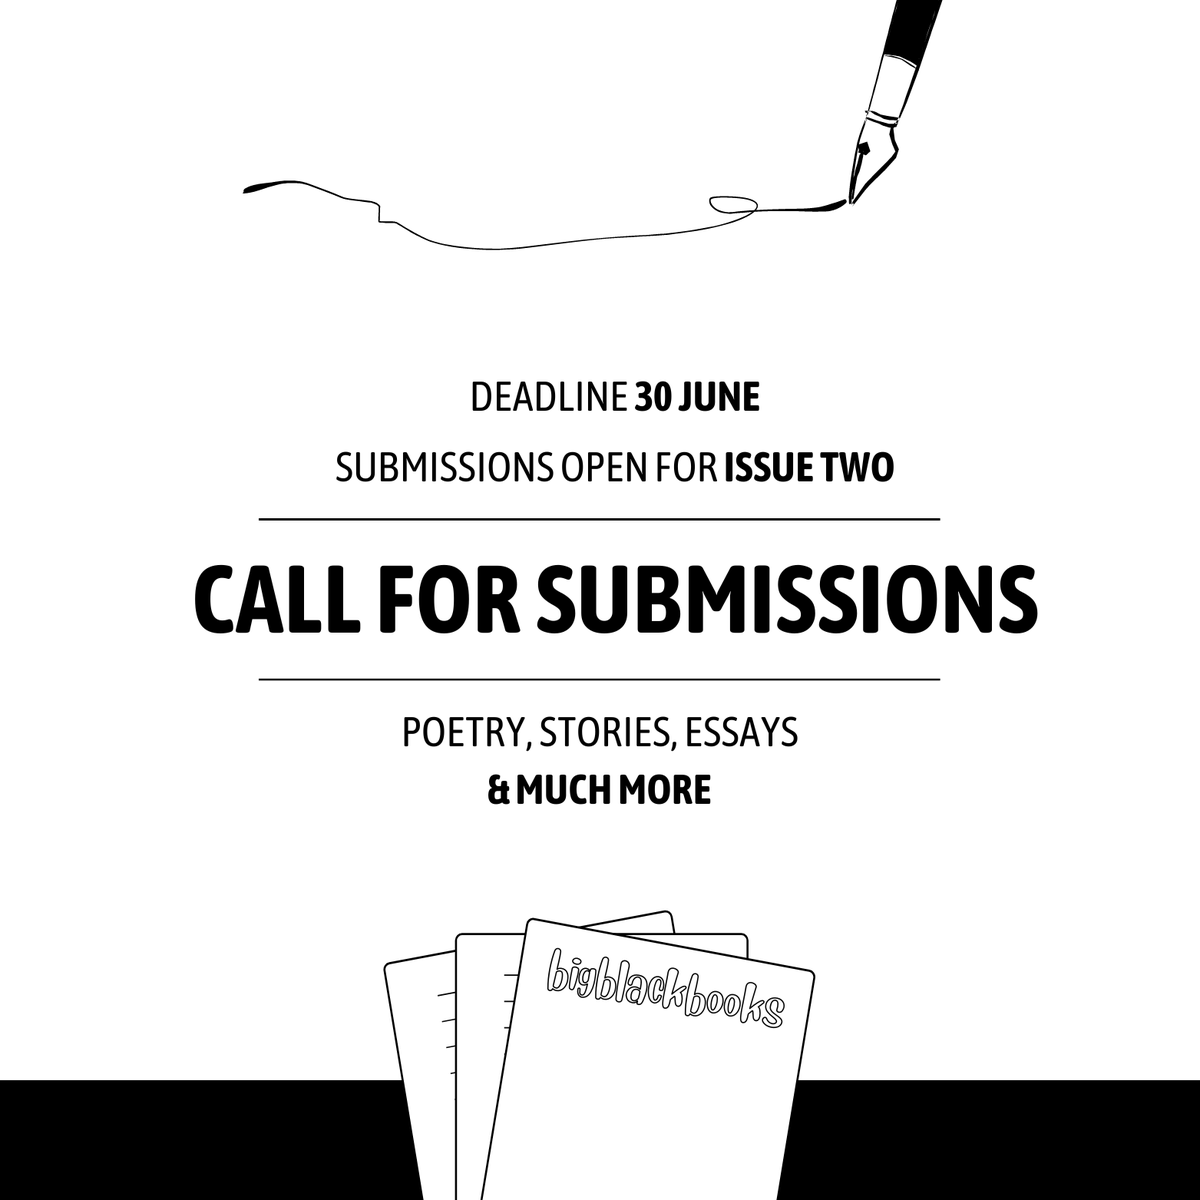 Submissions are now open for issue two of bigblackbooks, the online Black publication. Our issues feature the most promising emerging writers and put them in conversation with the big voices. ❔ bigblackbooks.org/issue-two 📩 BIGBLACKBOOKS@HOTMAIL.COM 🕐 DEADLINE 30 JUNE